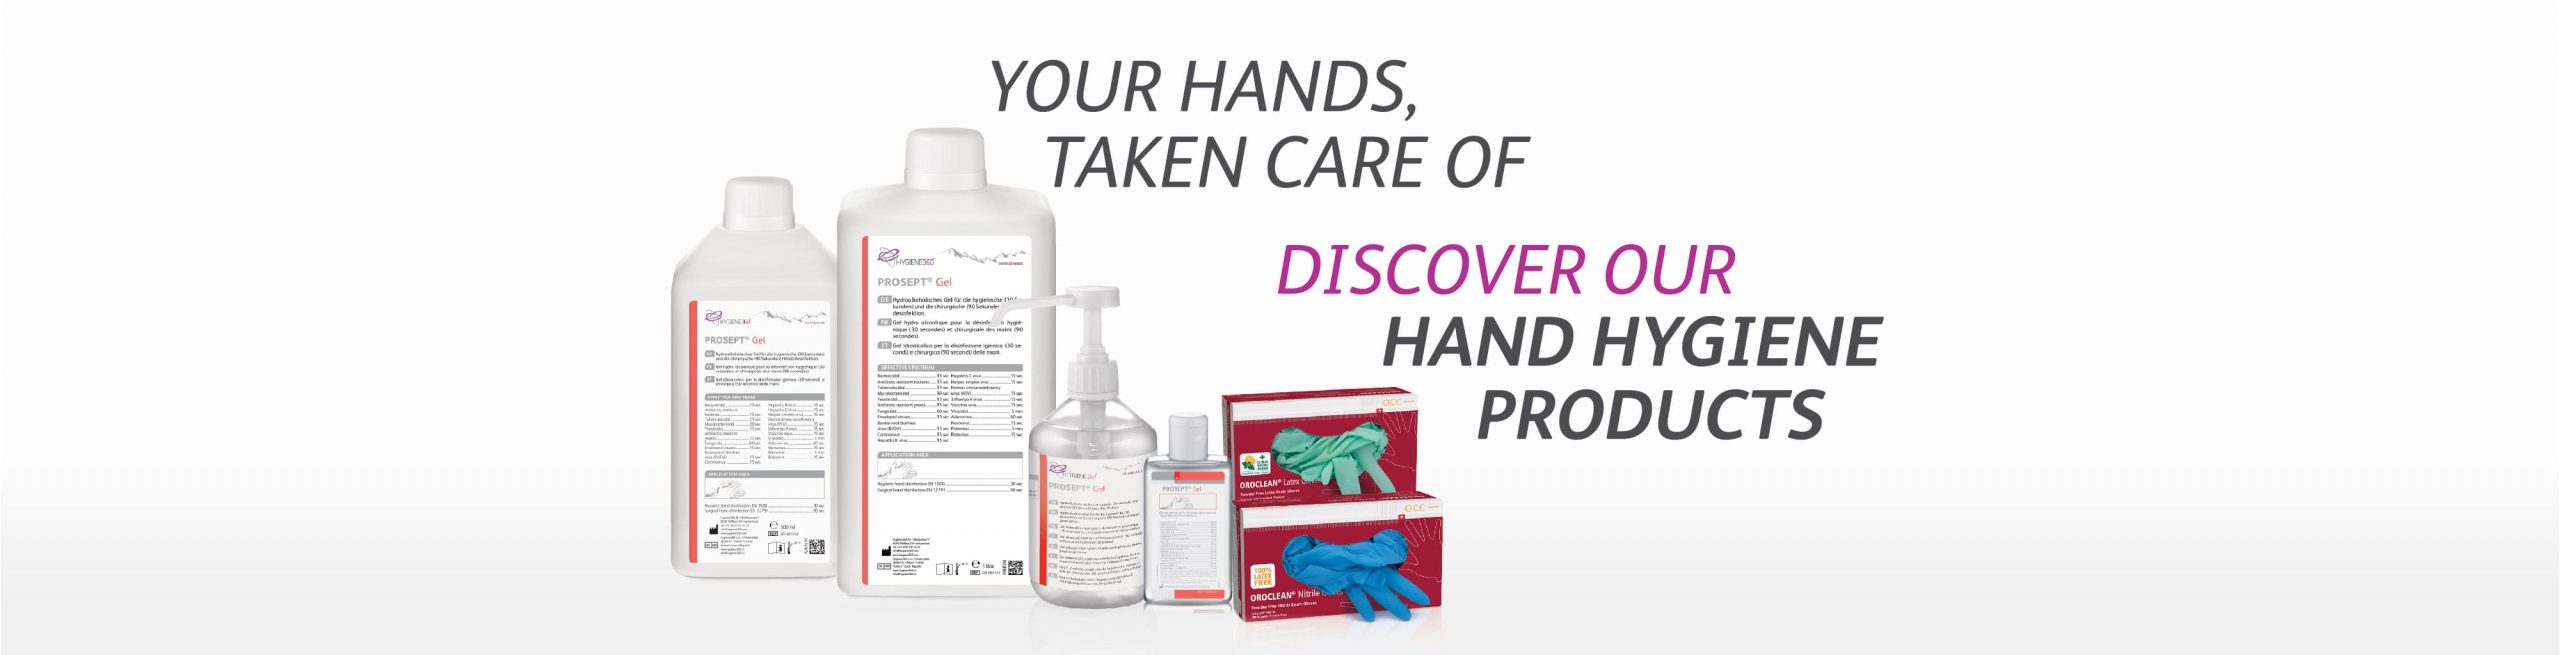 Hand Hygiene Products